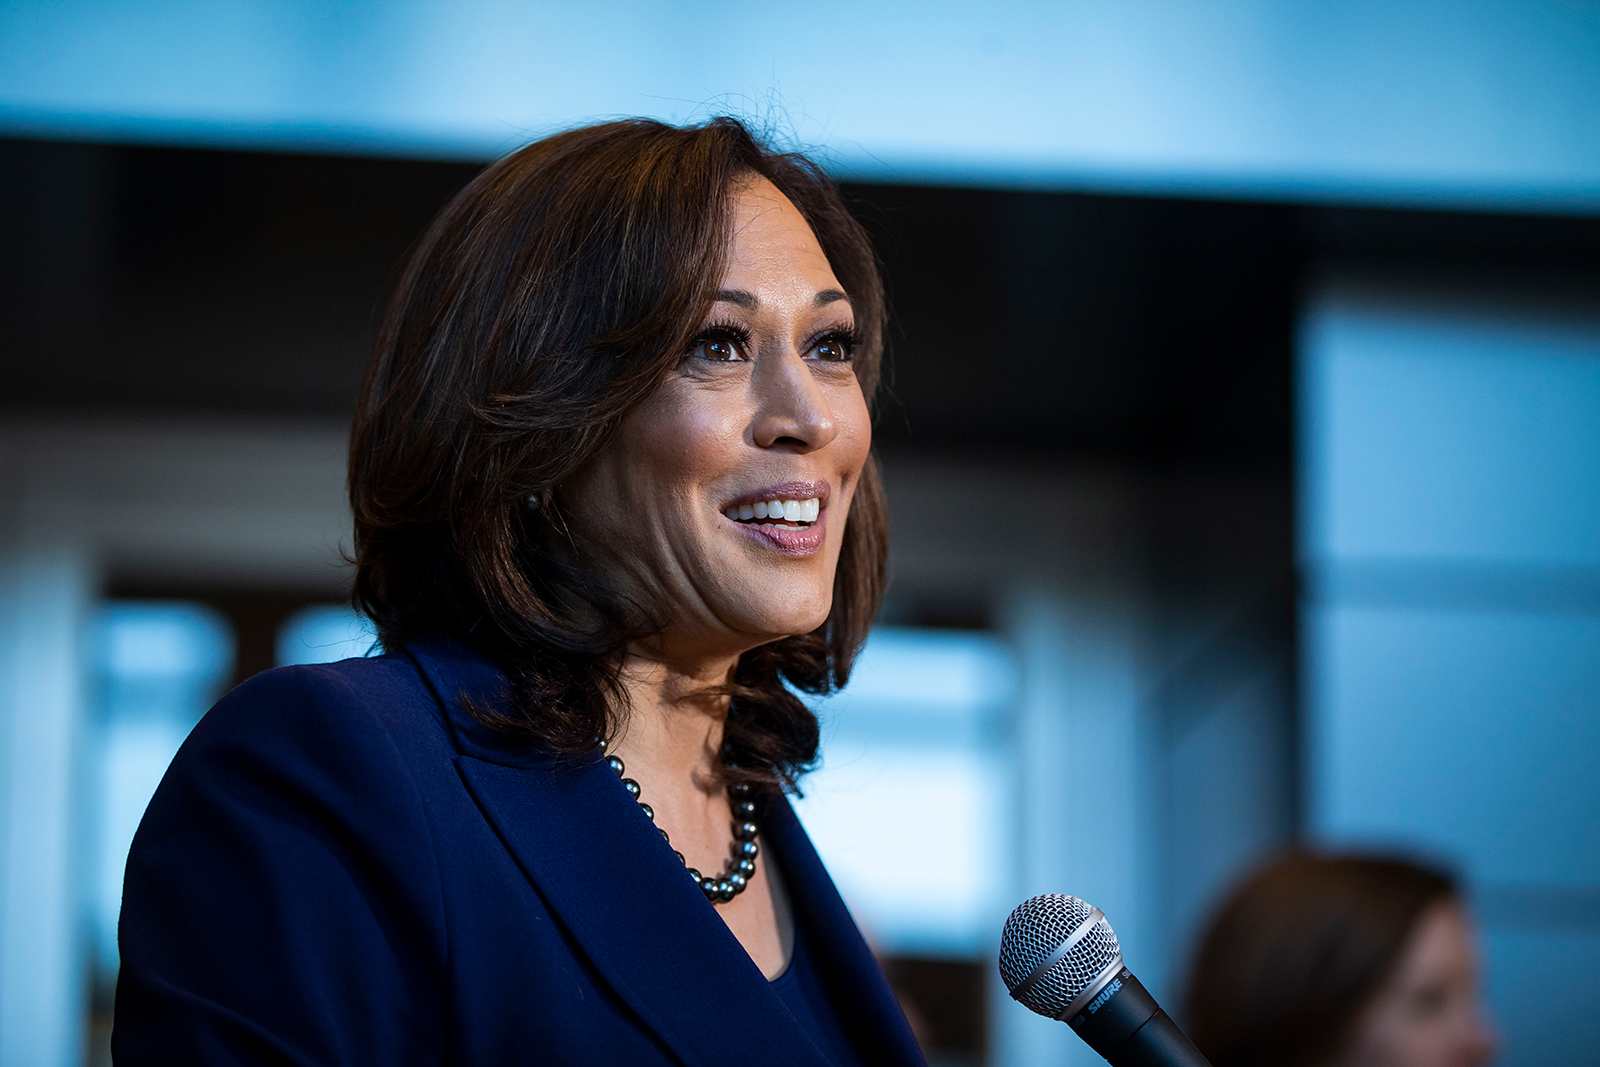 Sen. Kamala Harris speaks to reporters after announcing her candidacy for President of the United States, at Howard University, her alma mater, on January 21, 2019 in Washington, DC.